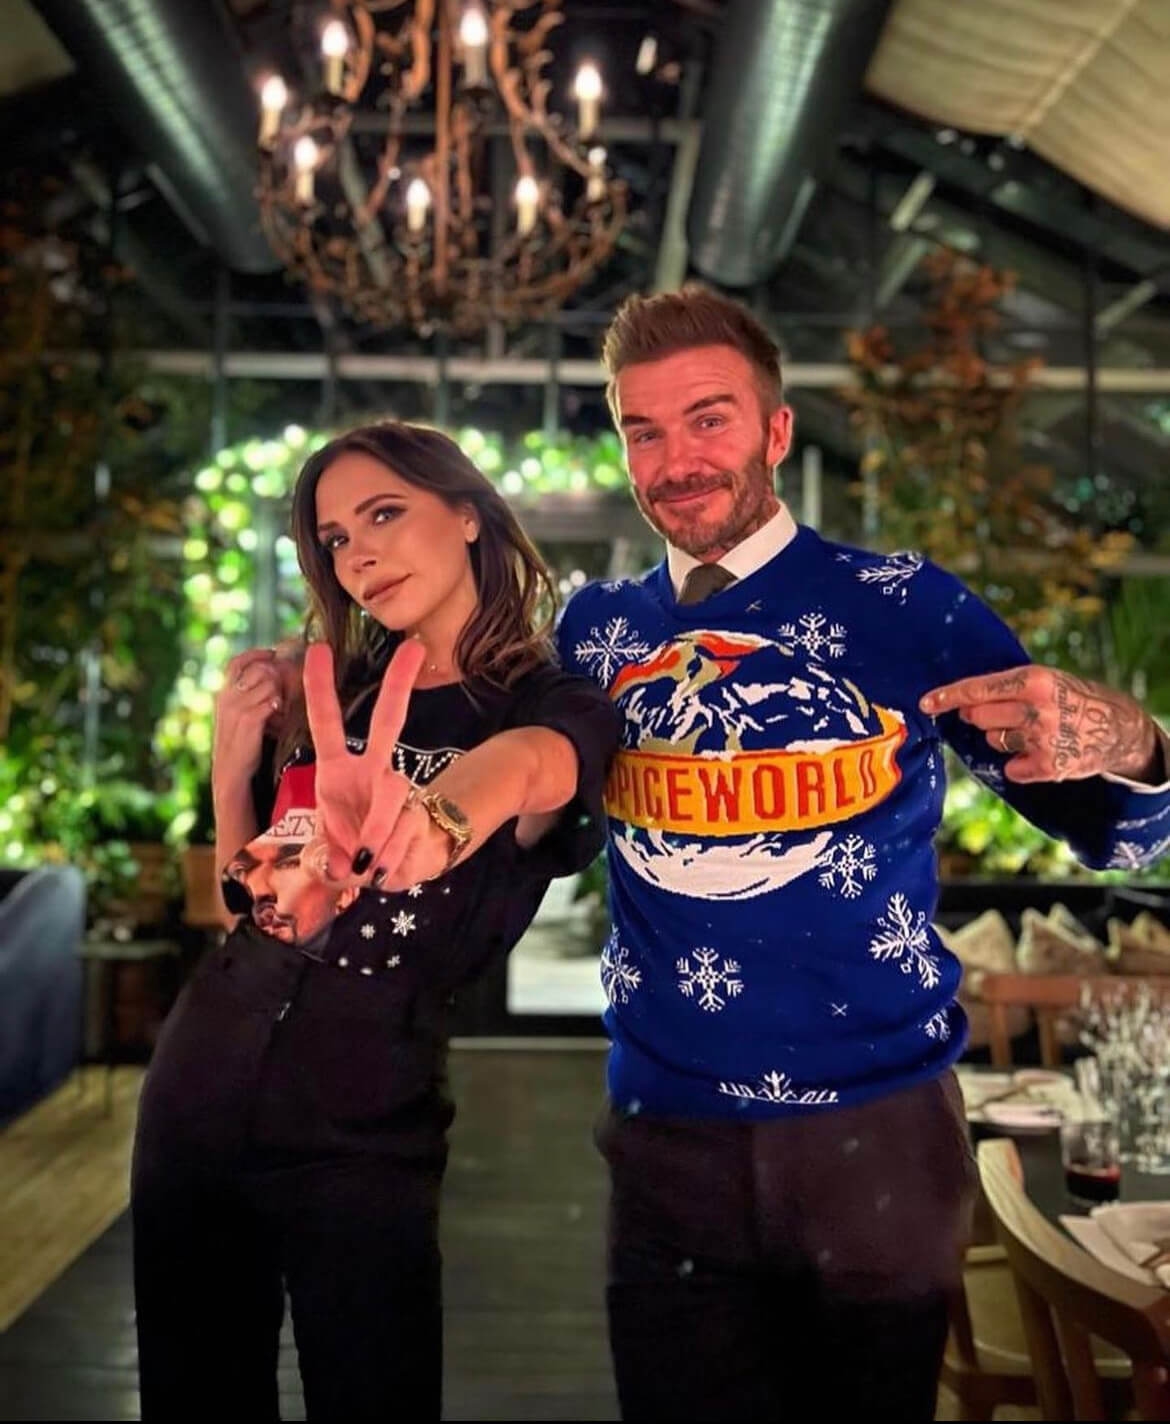 David posted this on his Instagram with the caption "Yep, I'm a fan of @victoriabeckham @spicegirls." This was posted around Christmas.